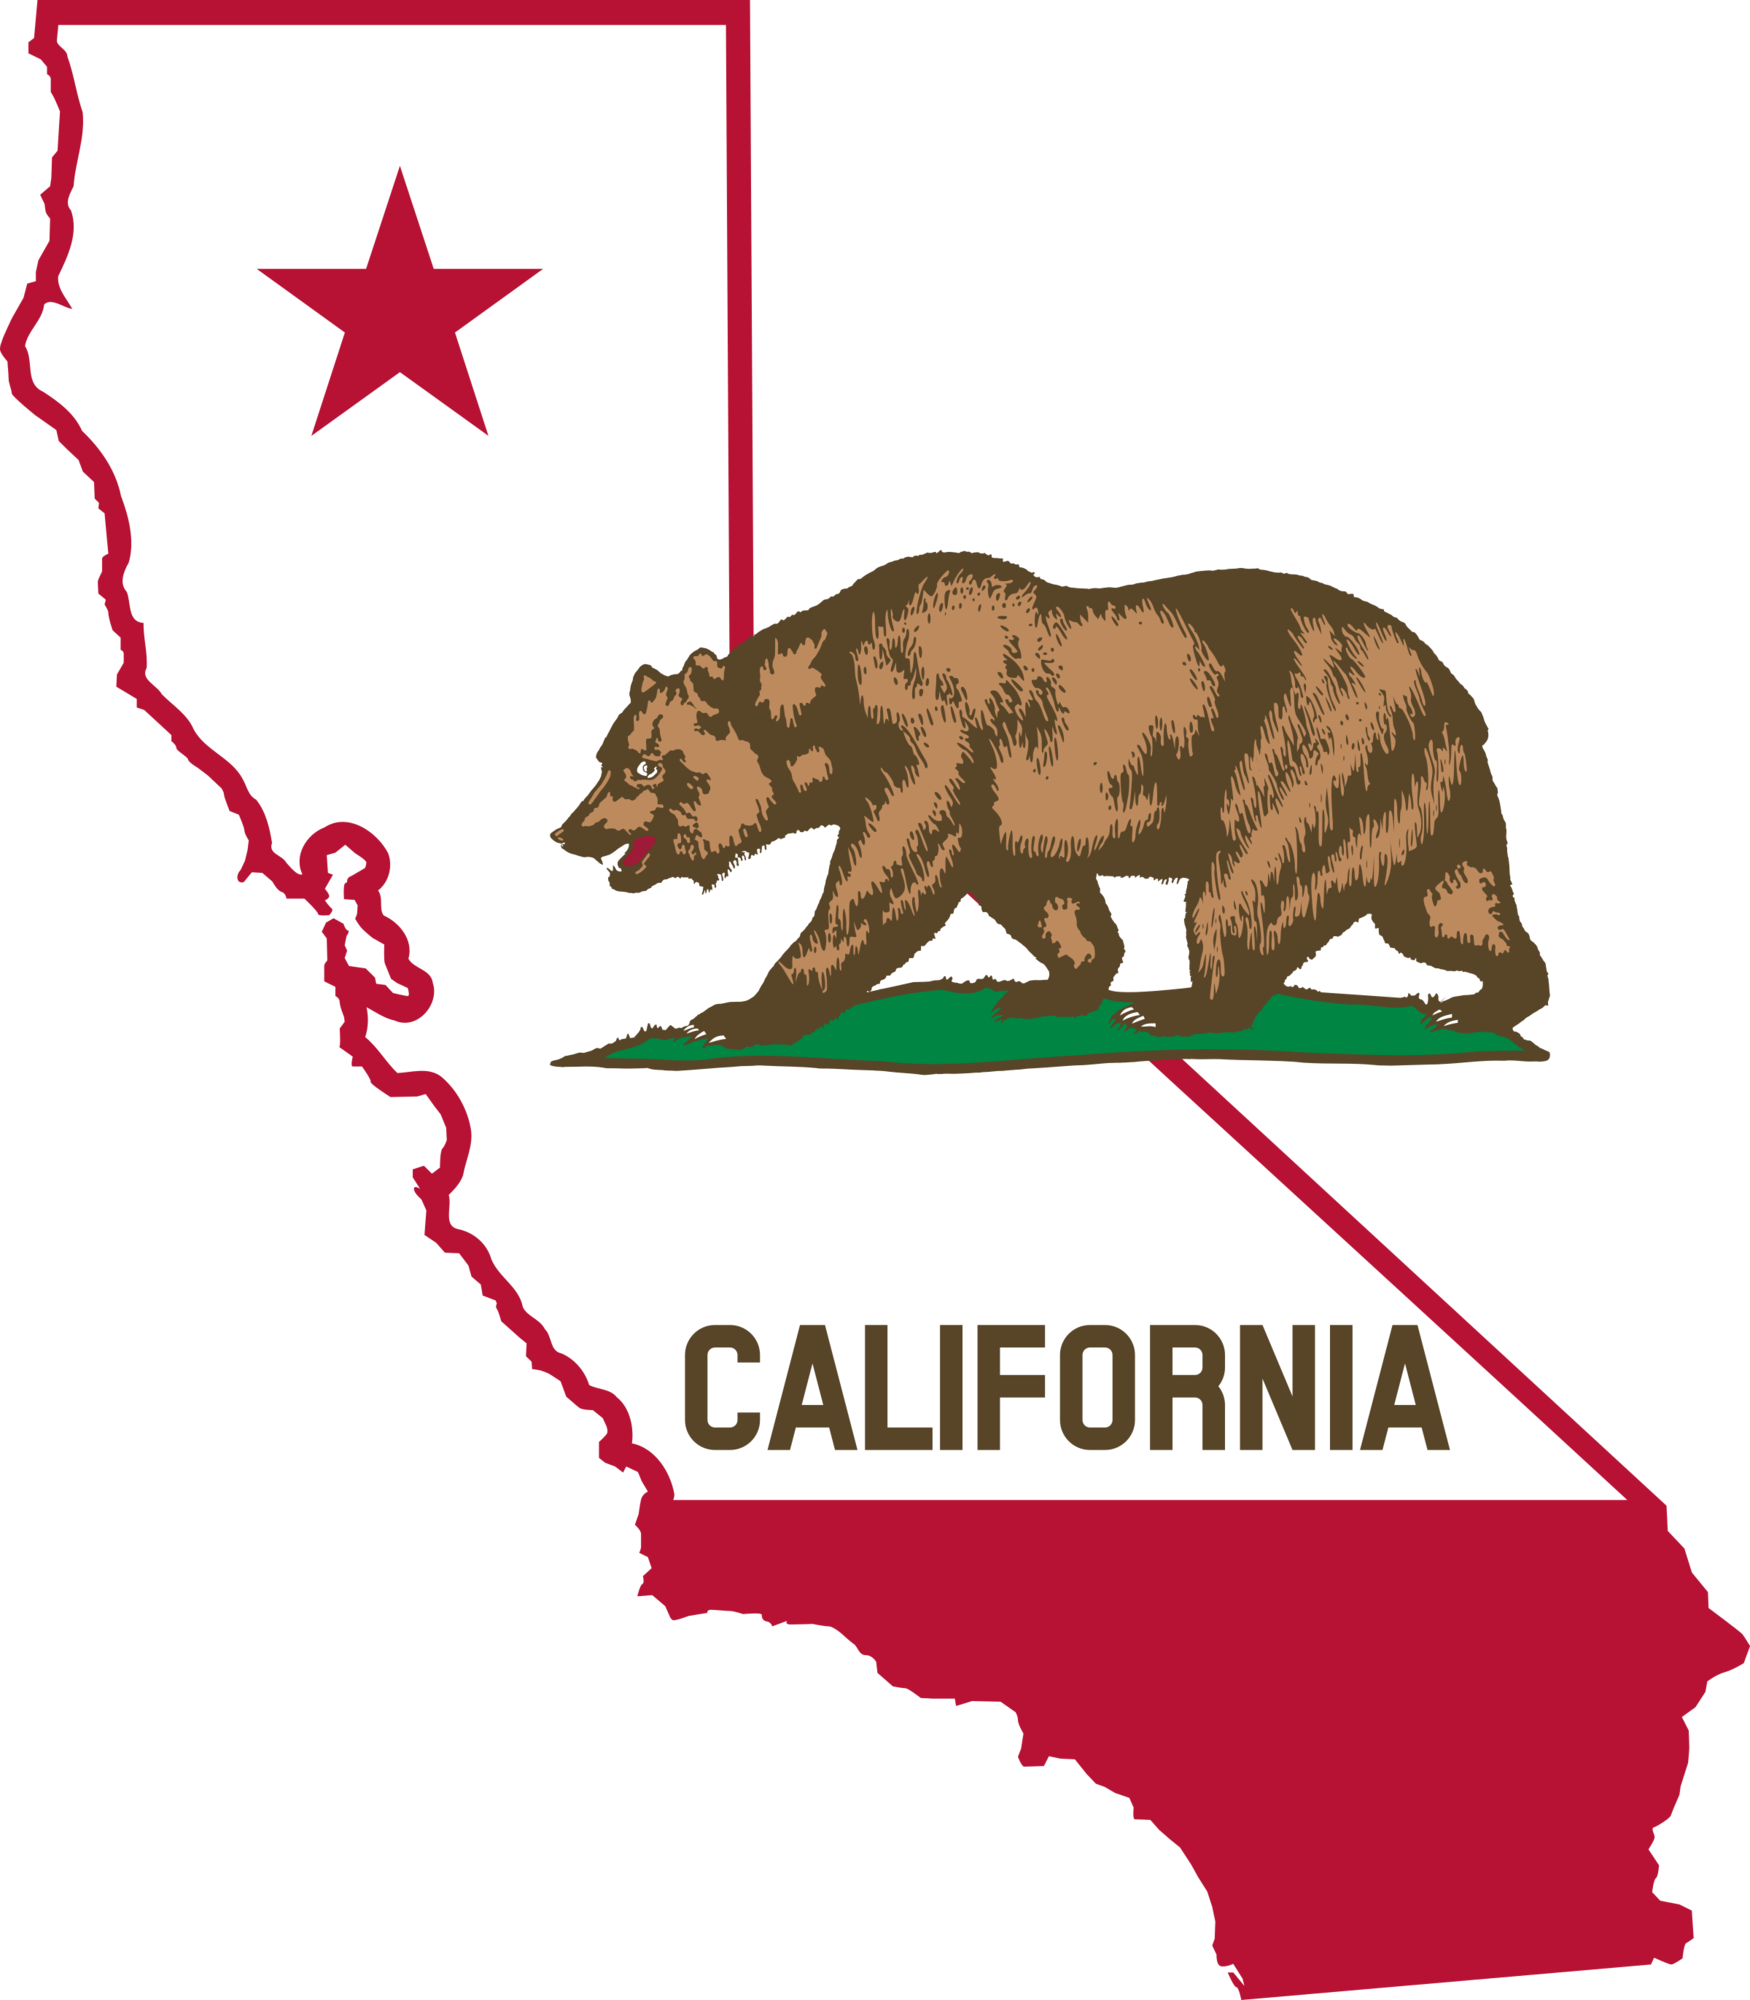 California-Outline-and-Flag.png